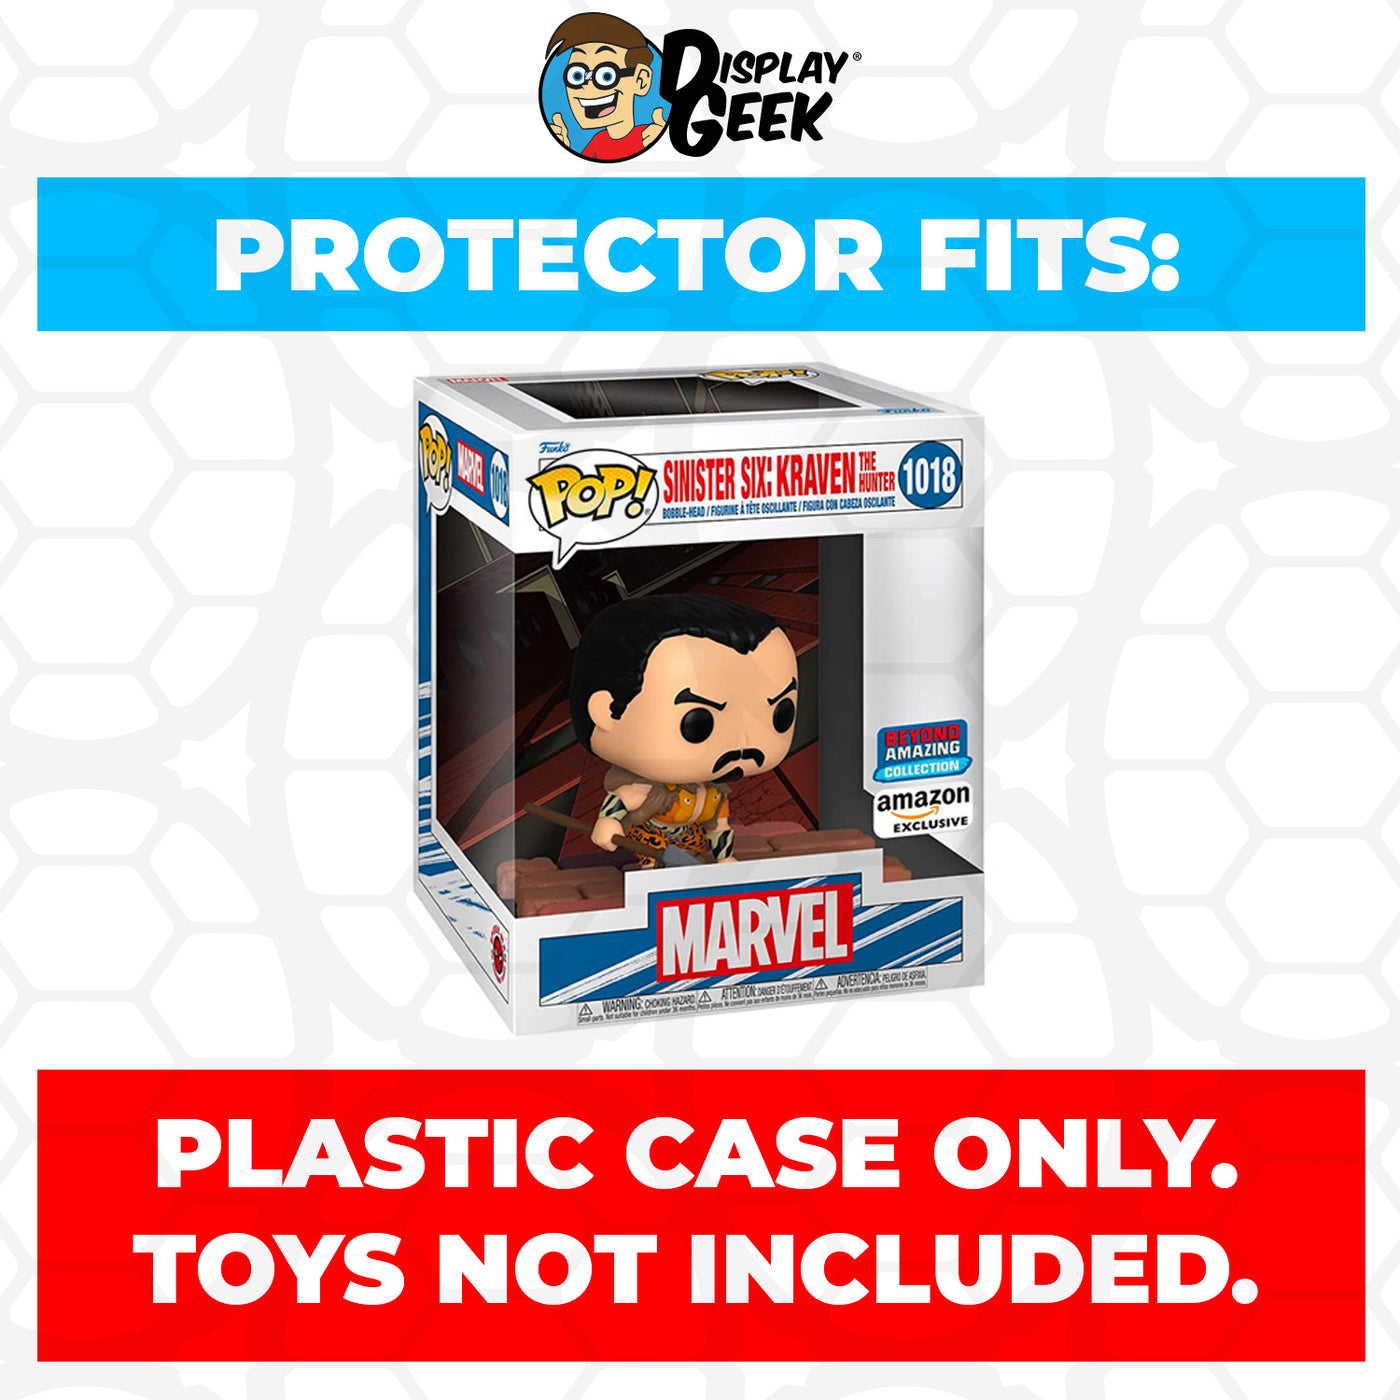 Pop Protector for Sinister Six Kraven the Hunter #1018 Funko Pop Deluxe on The Protector Guide App by Display Geek